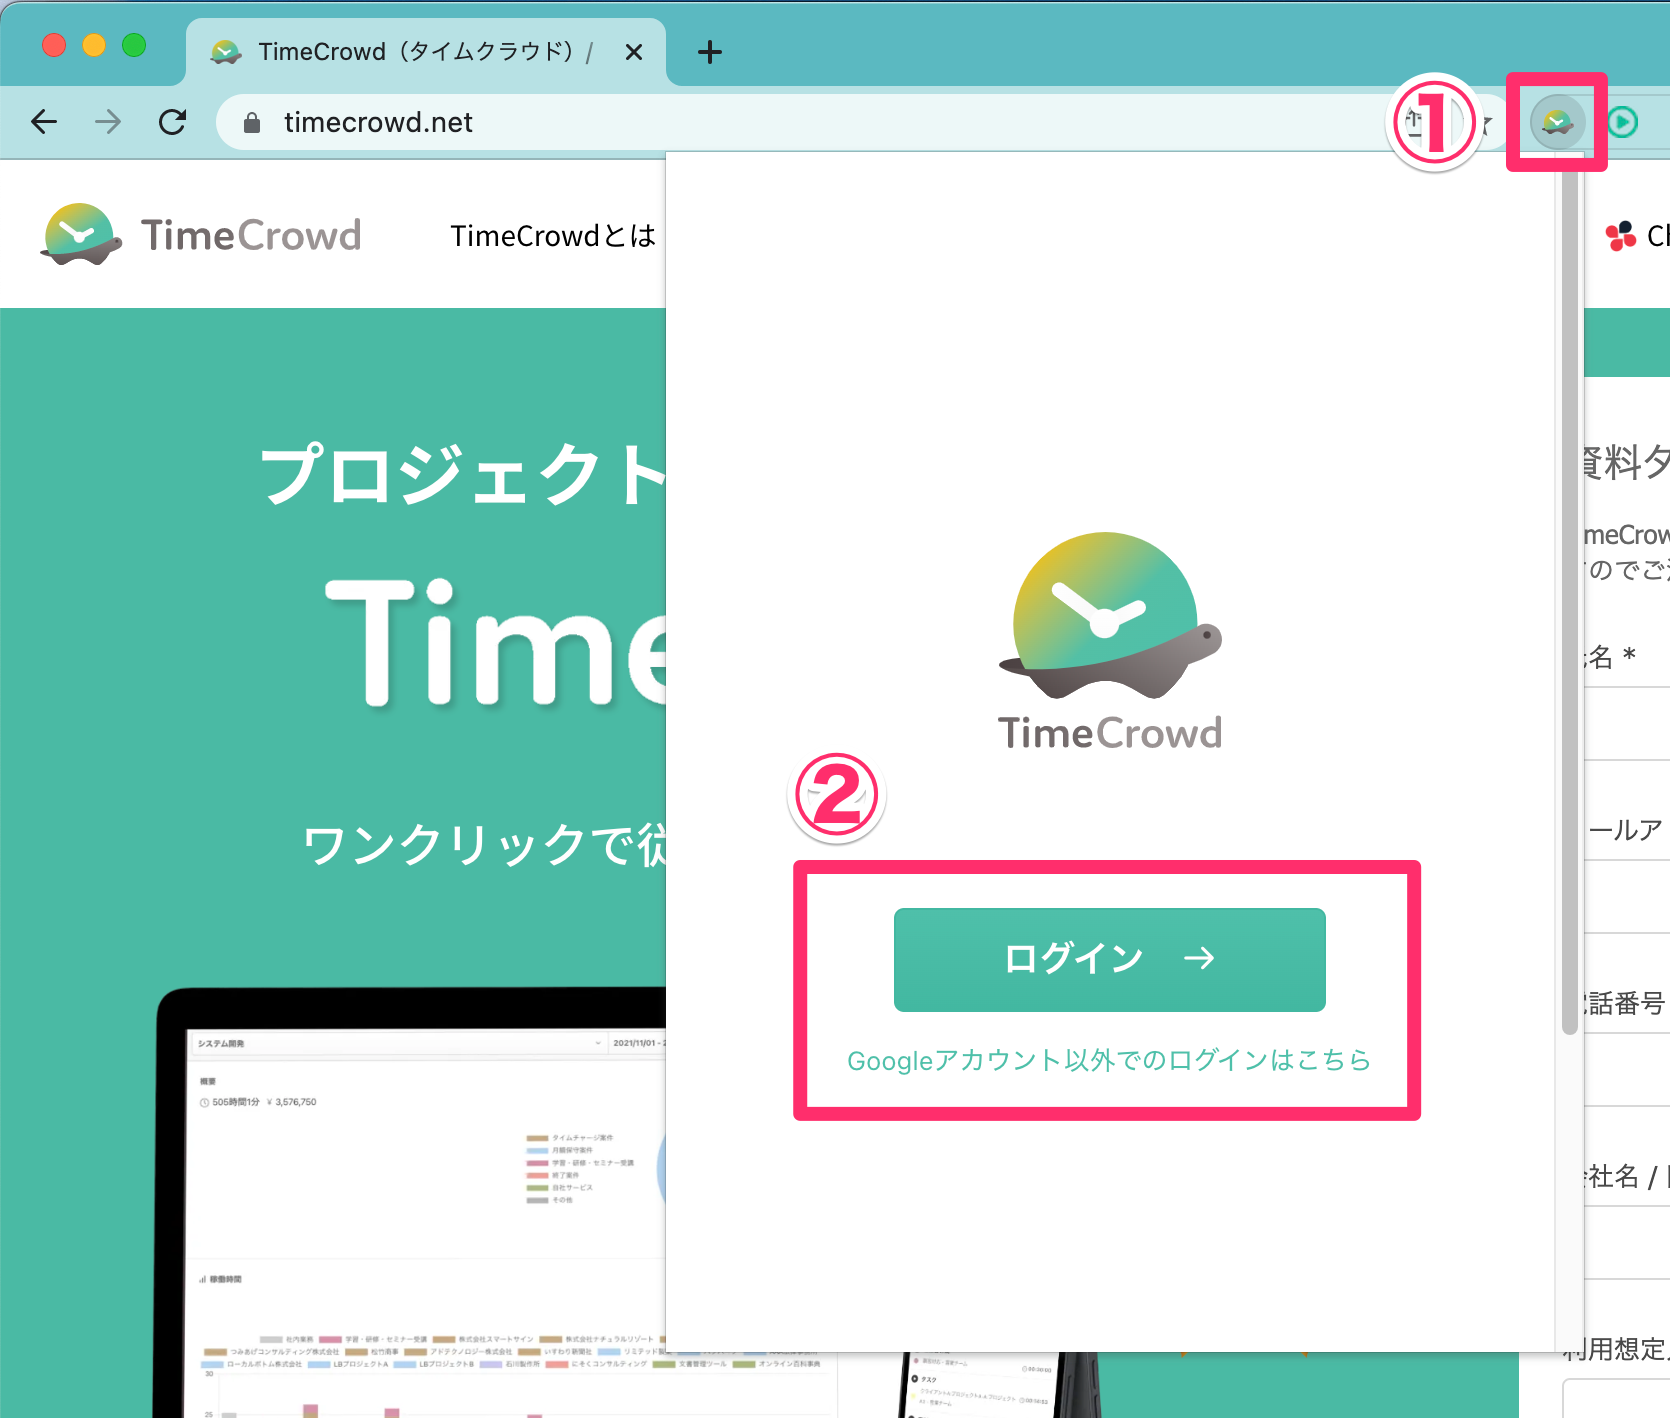 TimeCrowdにログインする